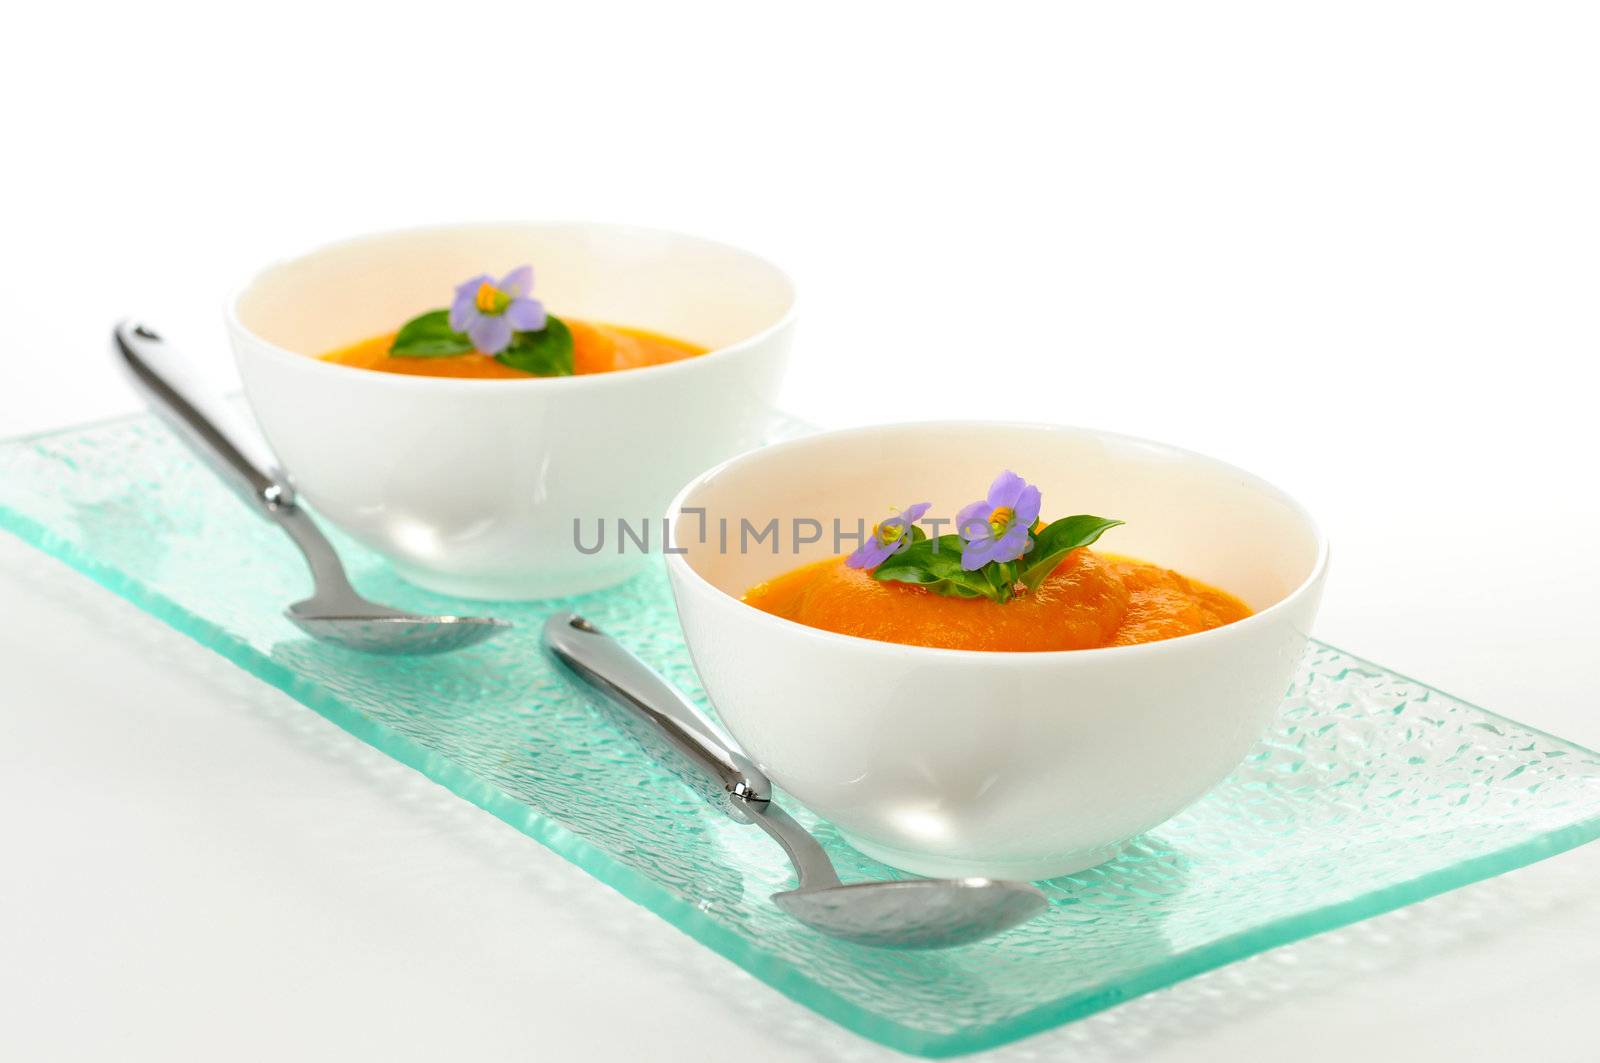 Delicious carrot soup garnished with edible flowers.